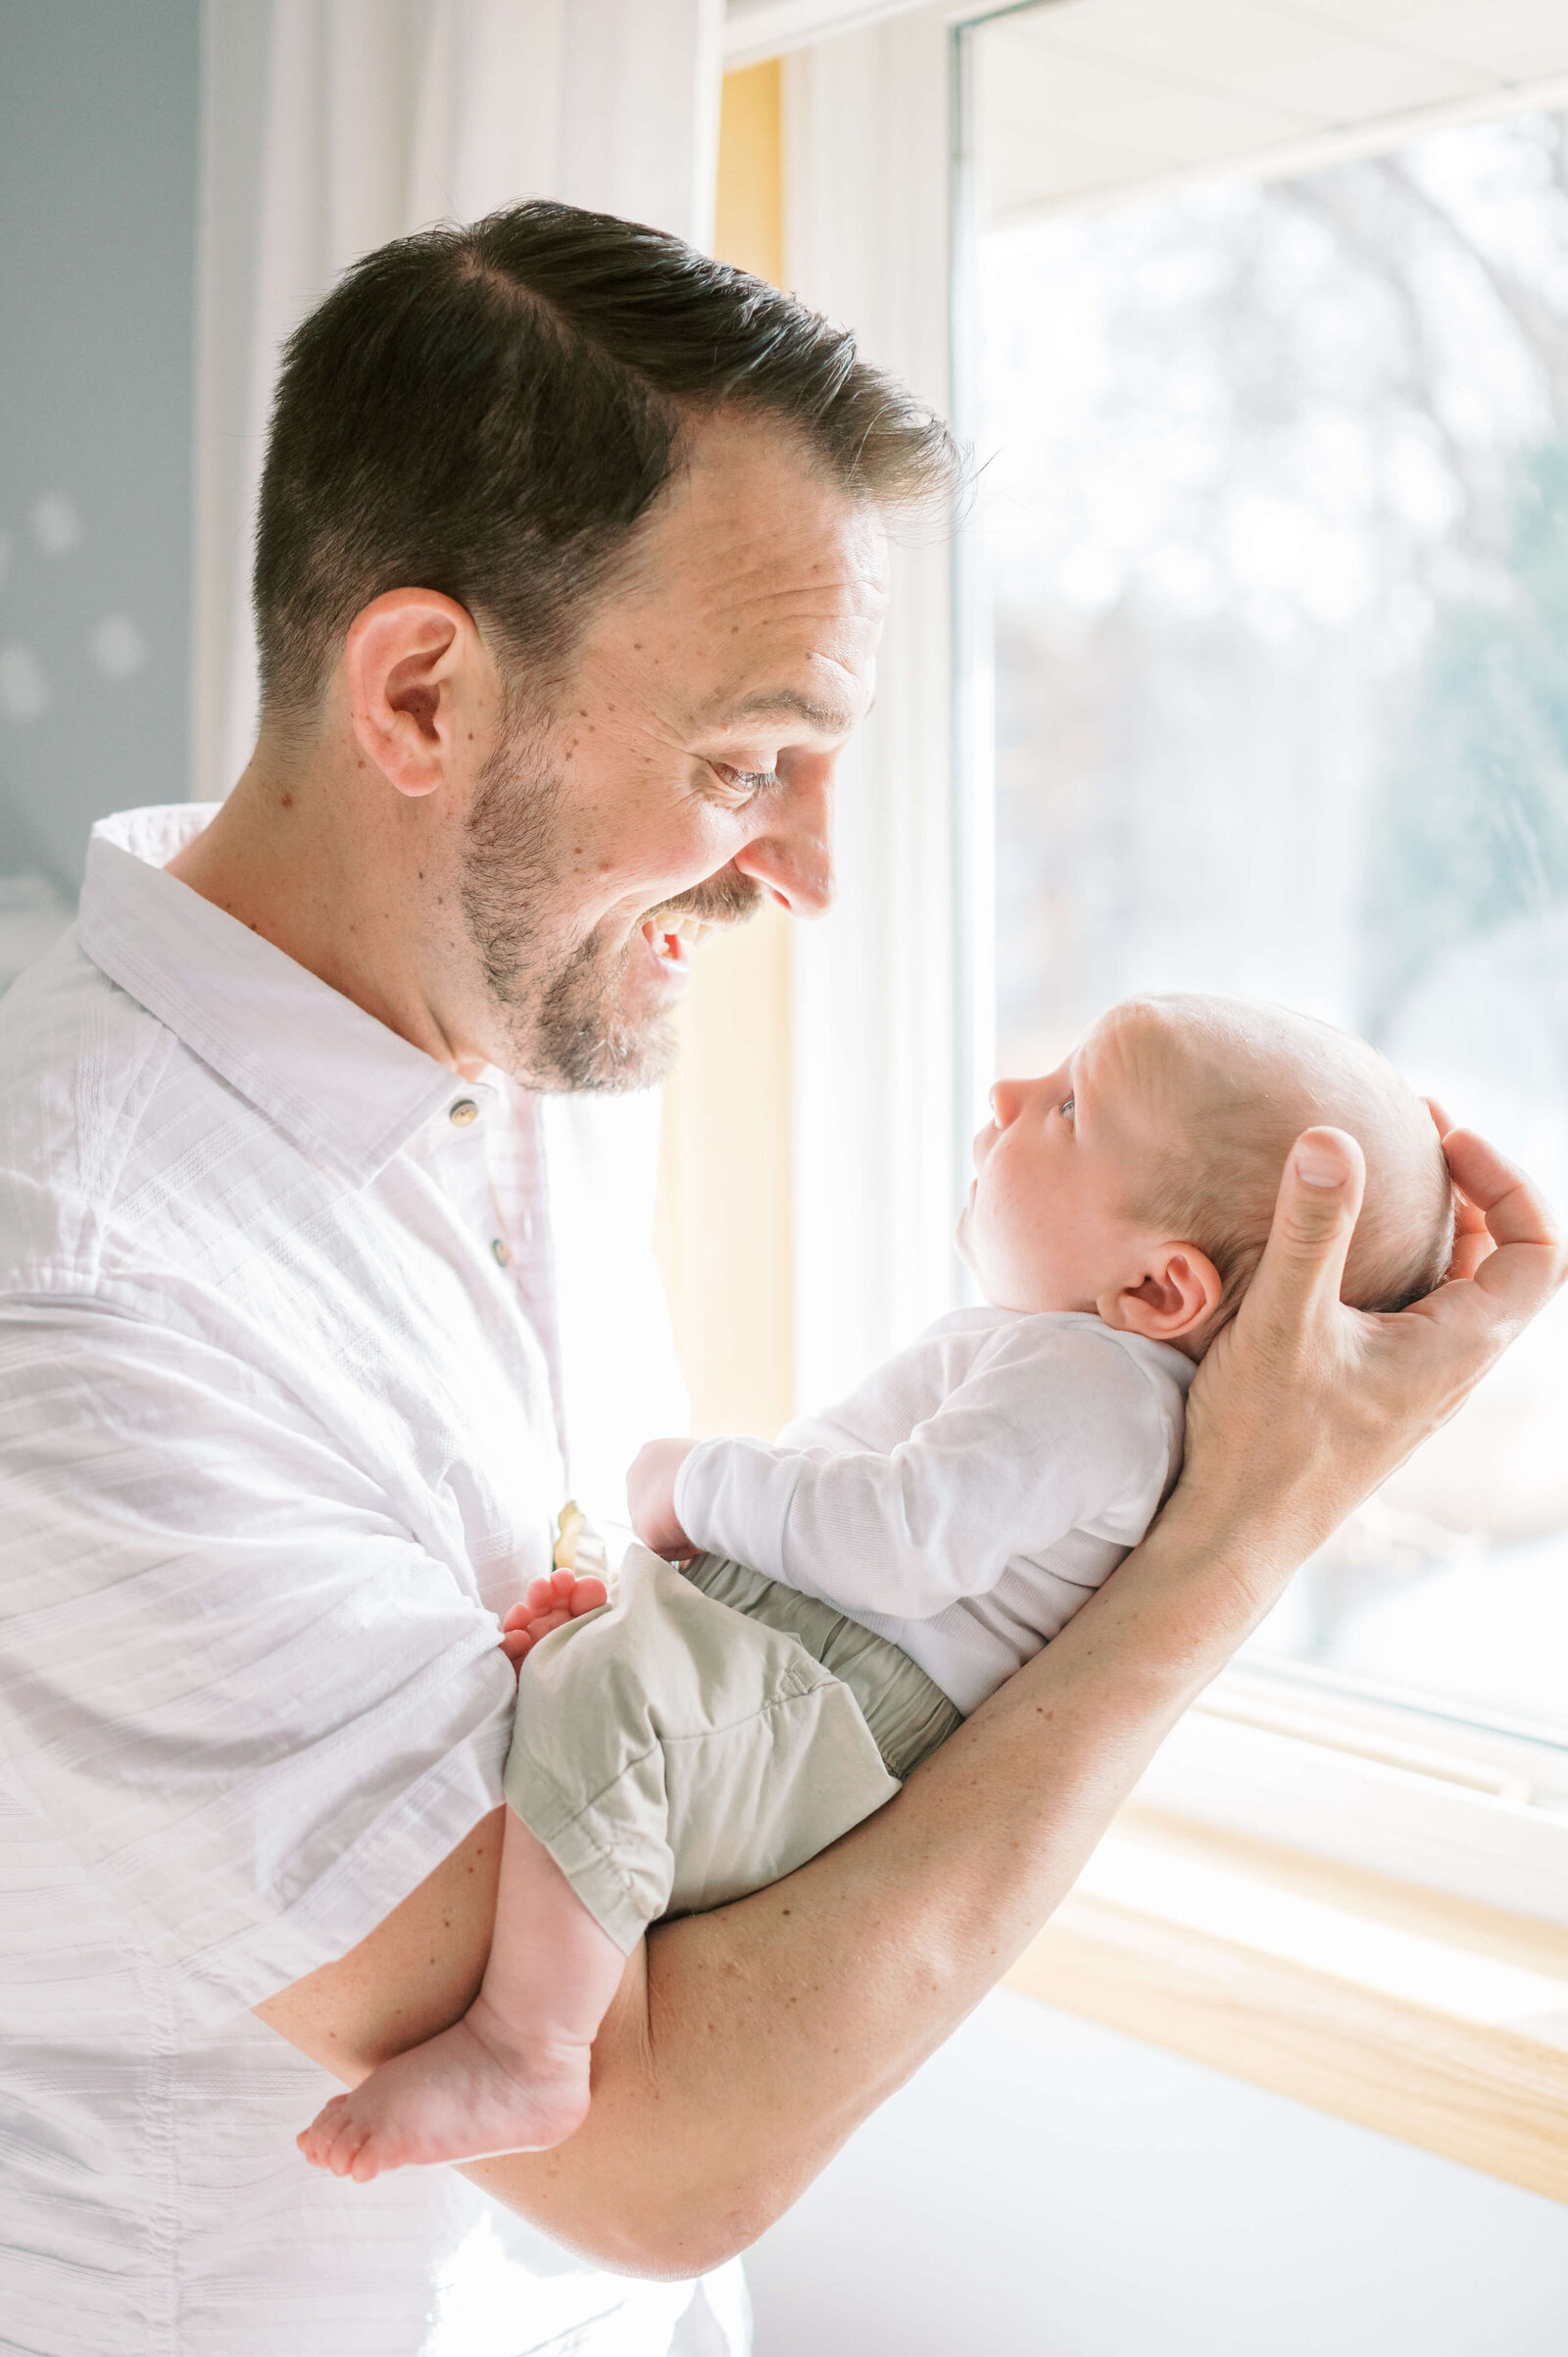 A dad, dressed in a white collared shirt, holds his infant son and gives him a big smile